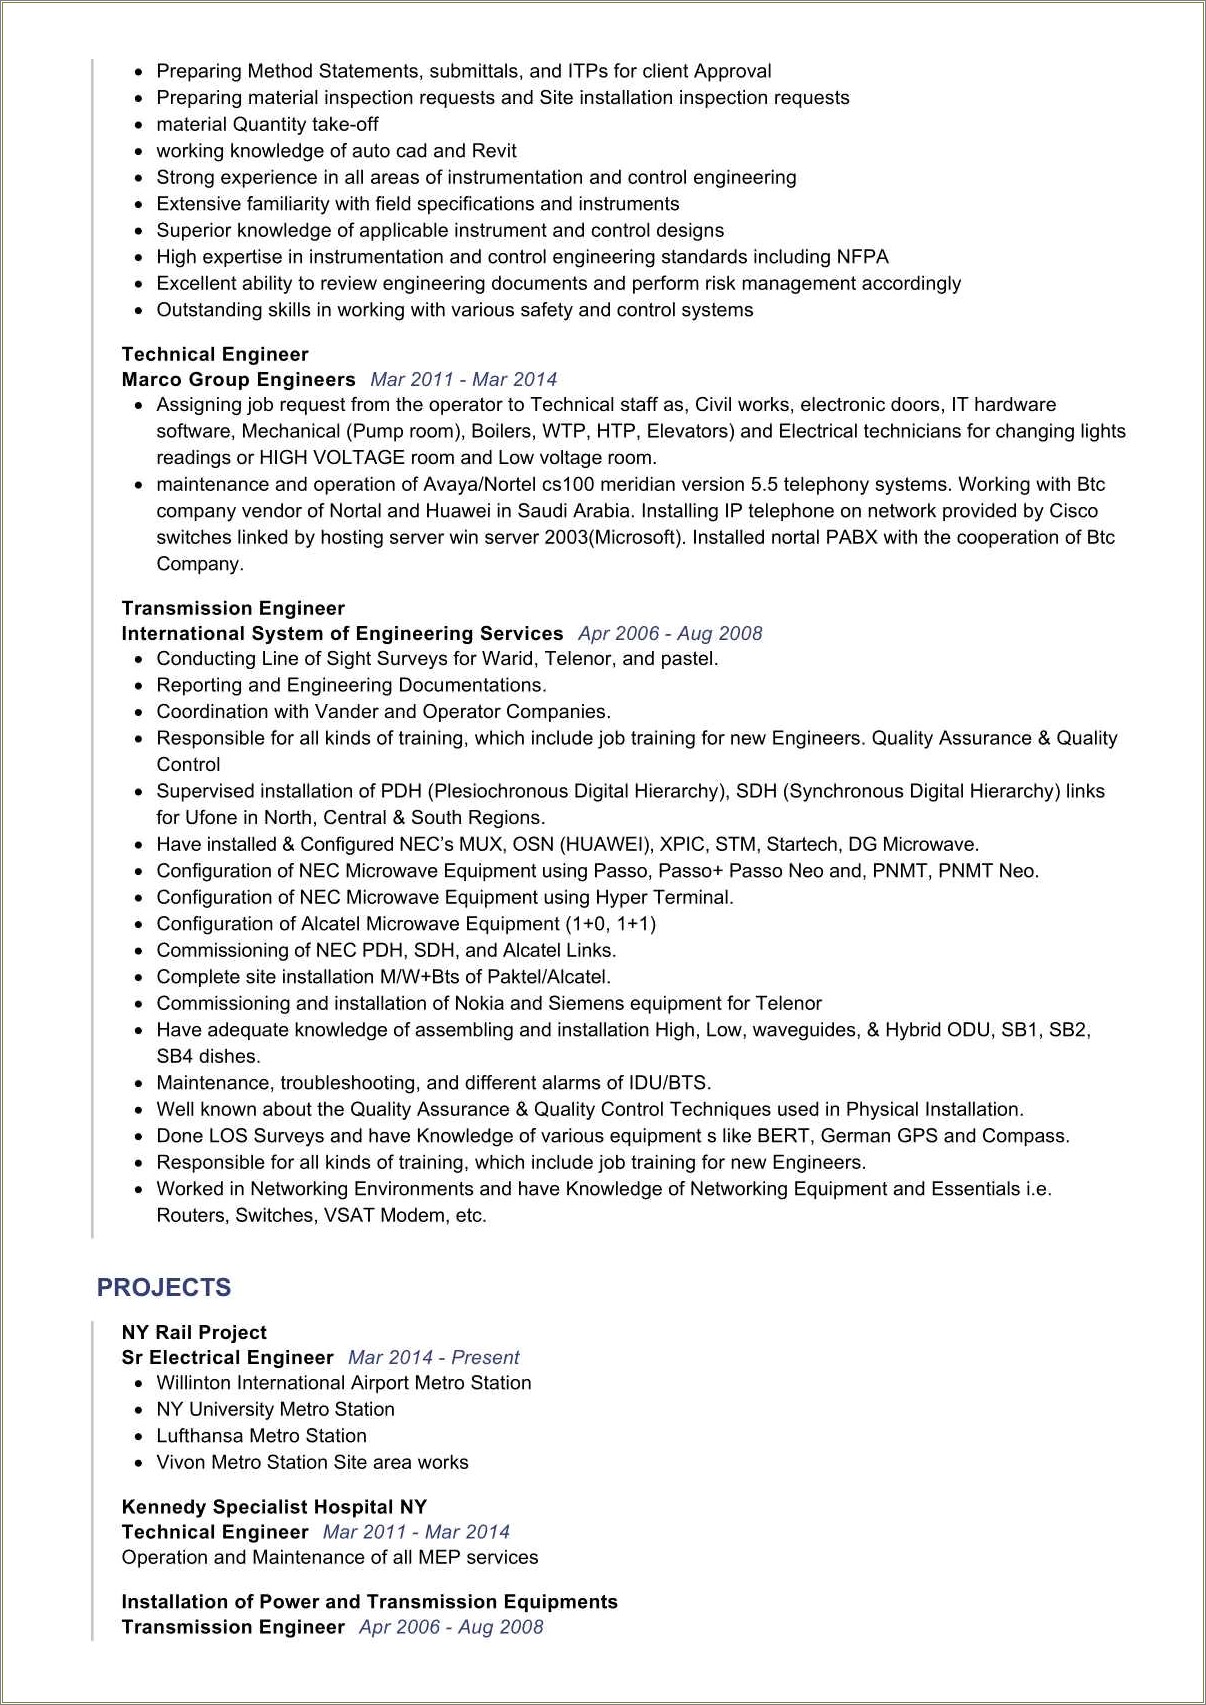 Resume For Electrical Engineer With 5 Years Experience